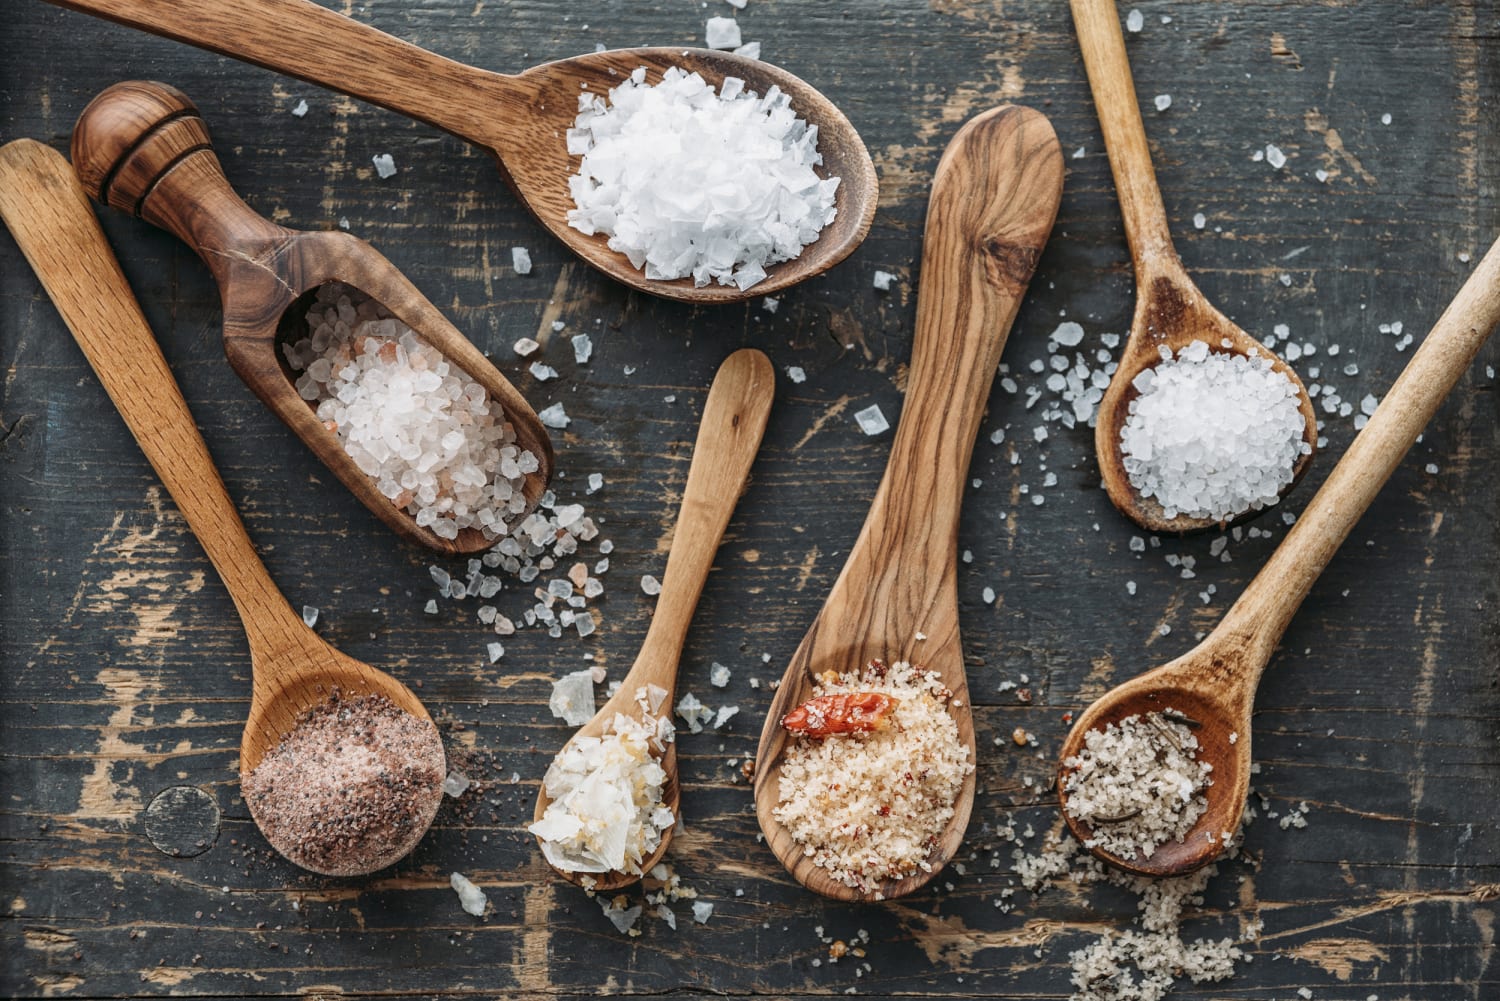 16 Uses for Salt That Dont Involve Cooking  HowStuffWorks